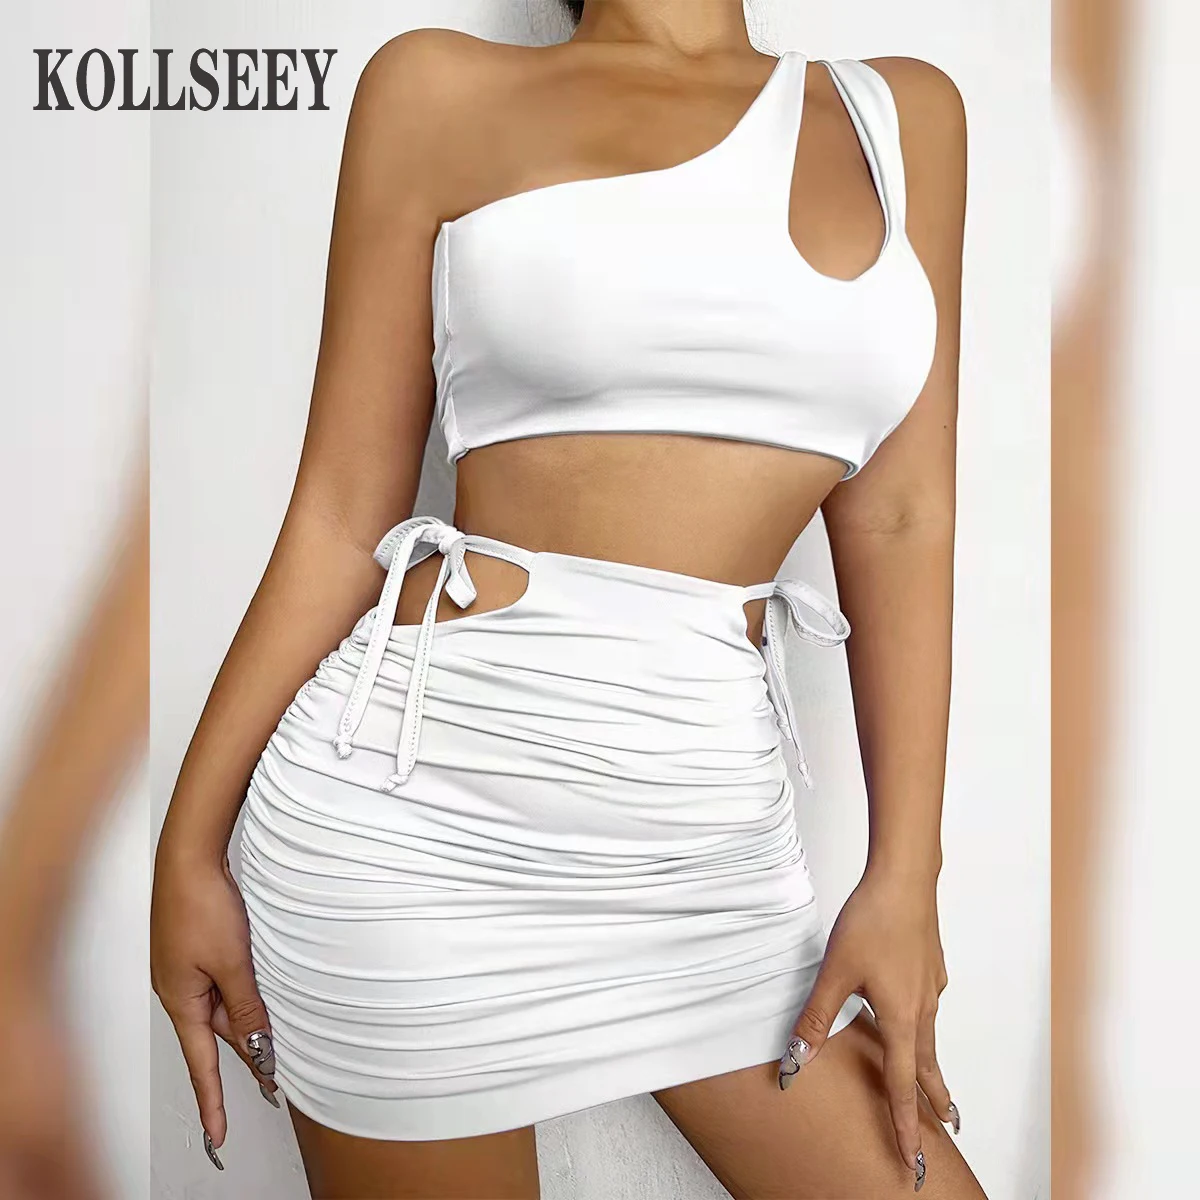 KOLLSEEY  Europe and The United States 2022 Spring New Women's Fashion Long Sleeves Square Collar Sexy Low-cut Slim Buttock Dres enlarge